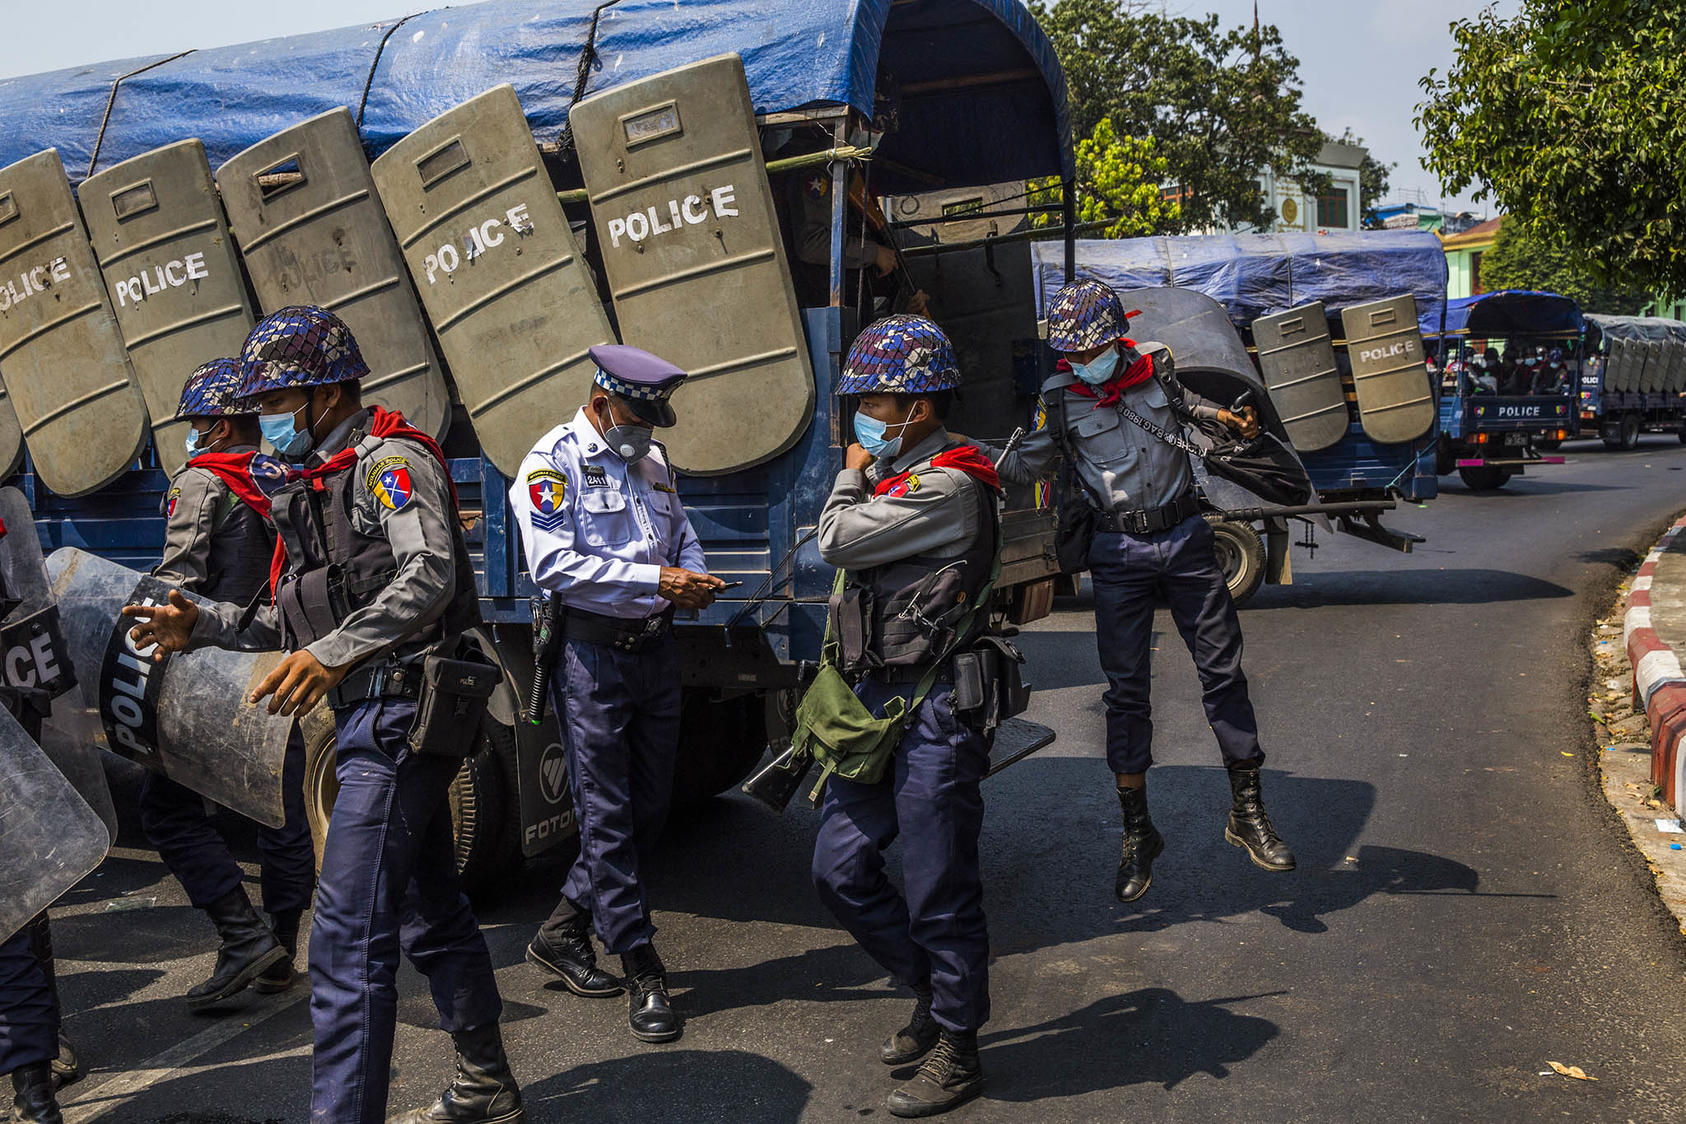 Riot police officers in Yangon, Myanmar, Feb. 22, 2021. (The New York Times)